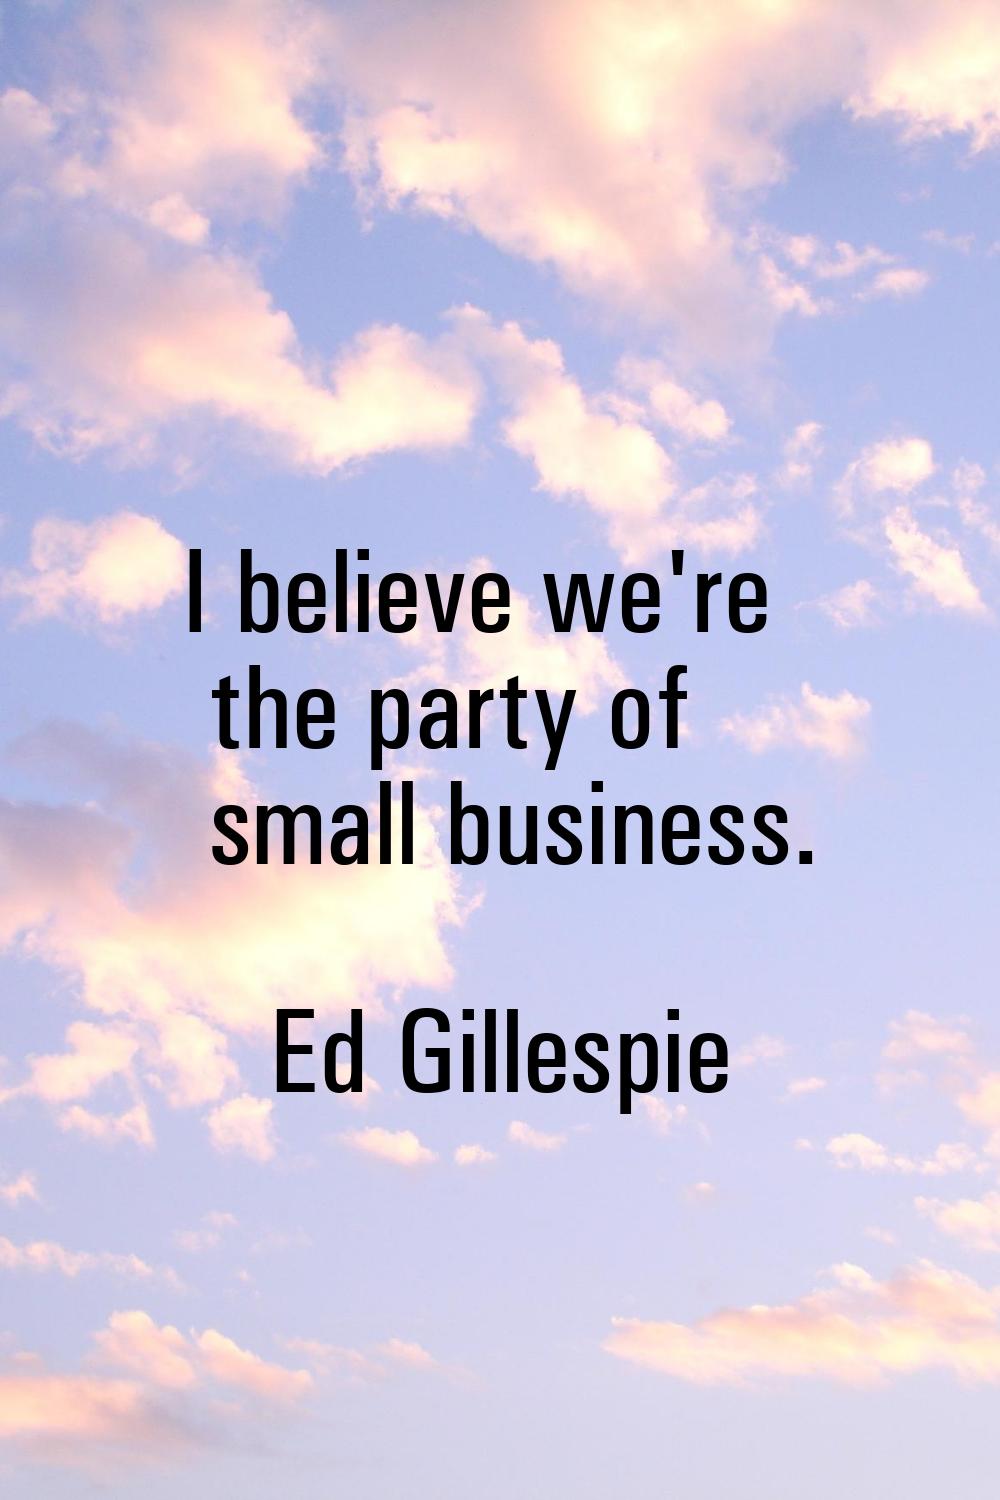 I believe we're the party of small business.